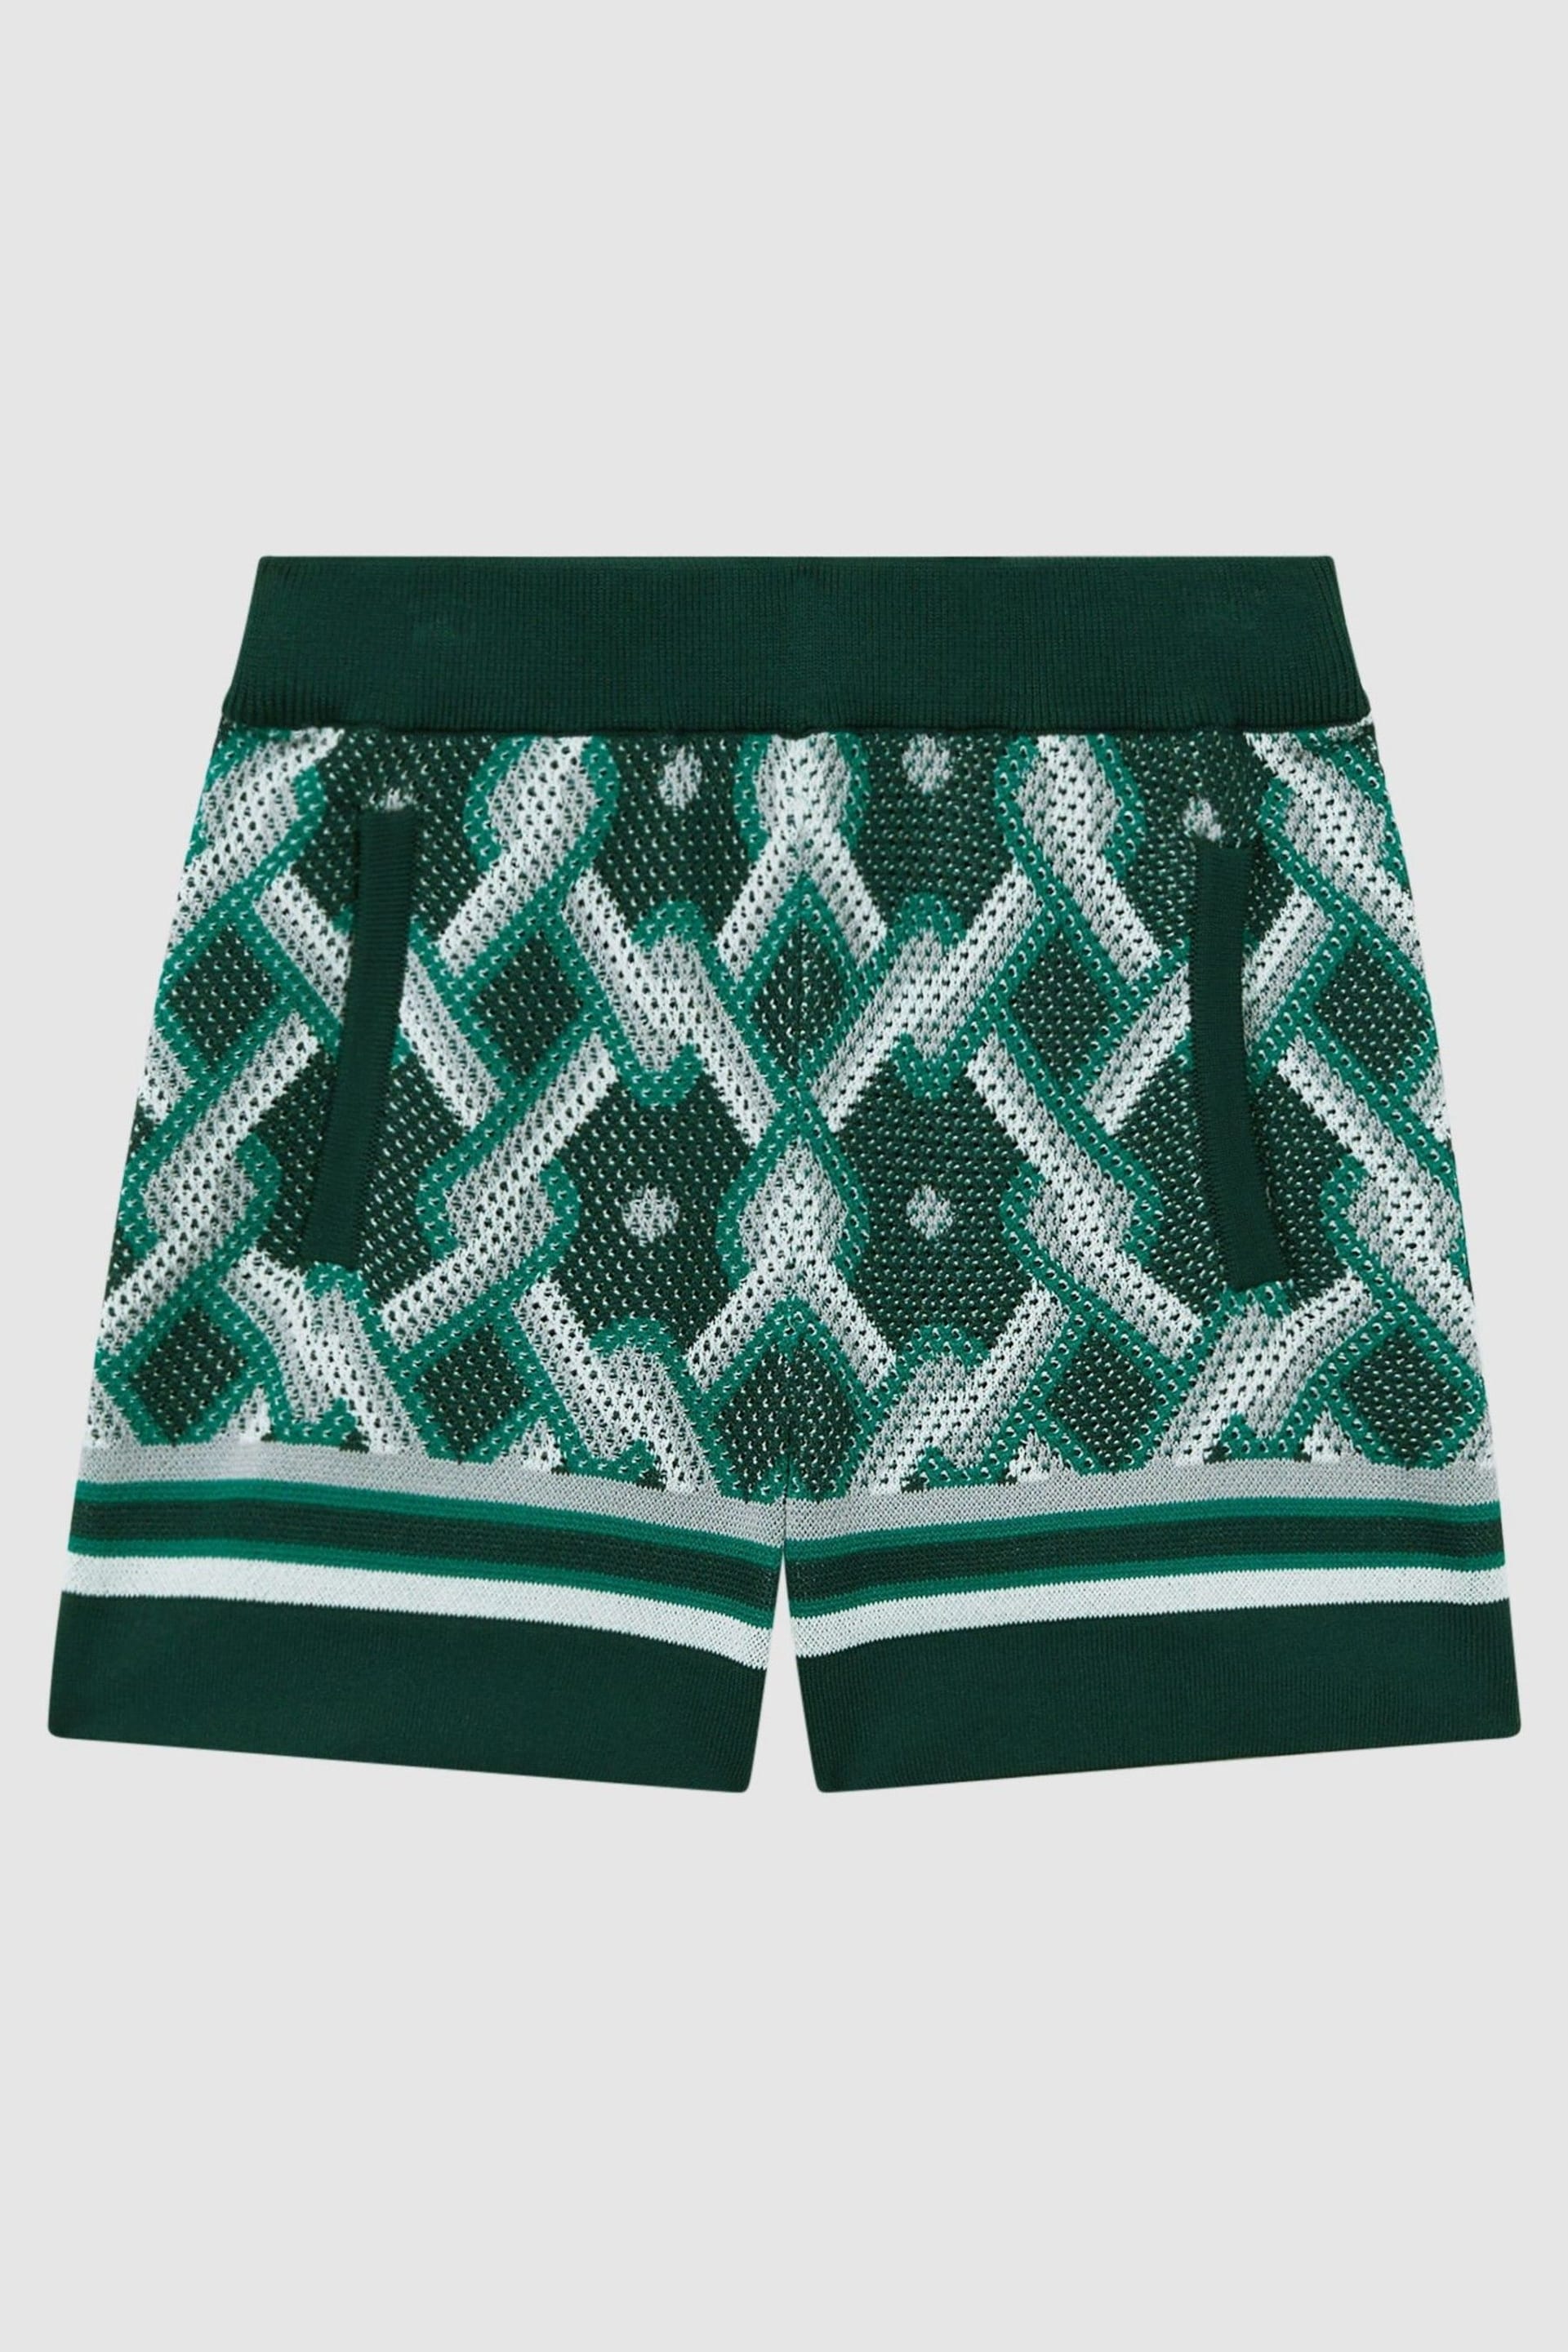 Reiss Green Multi Jack Teen Knitted Elasticated Waistband Shorts - Image 2 of 6